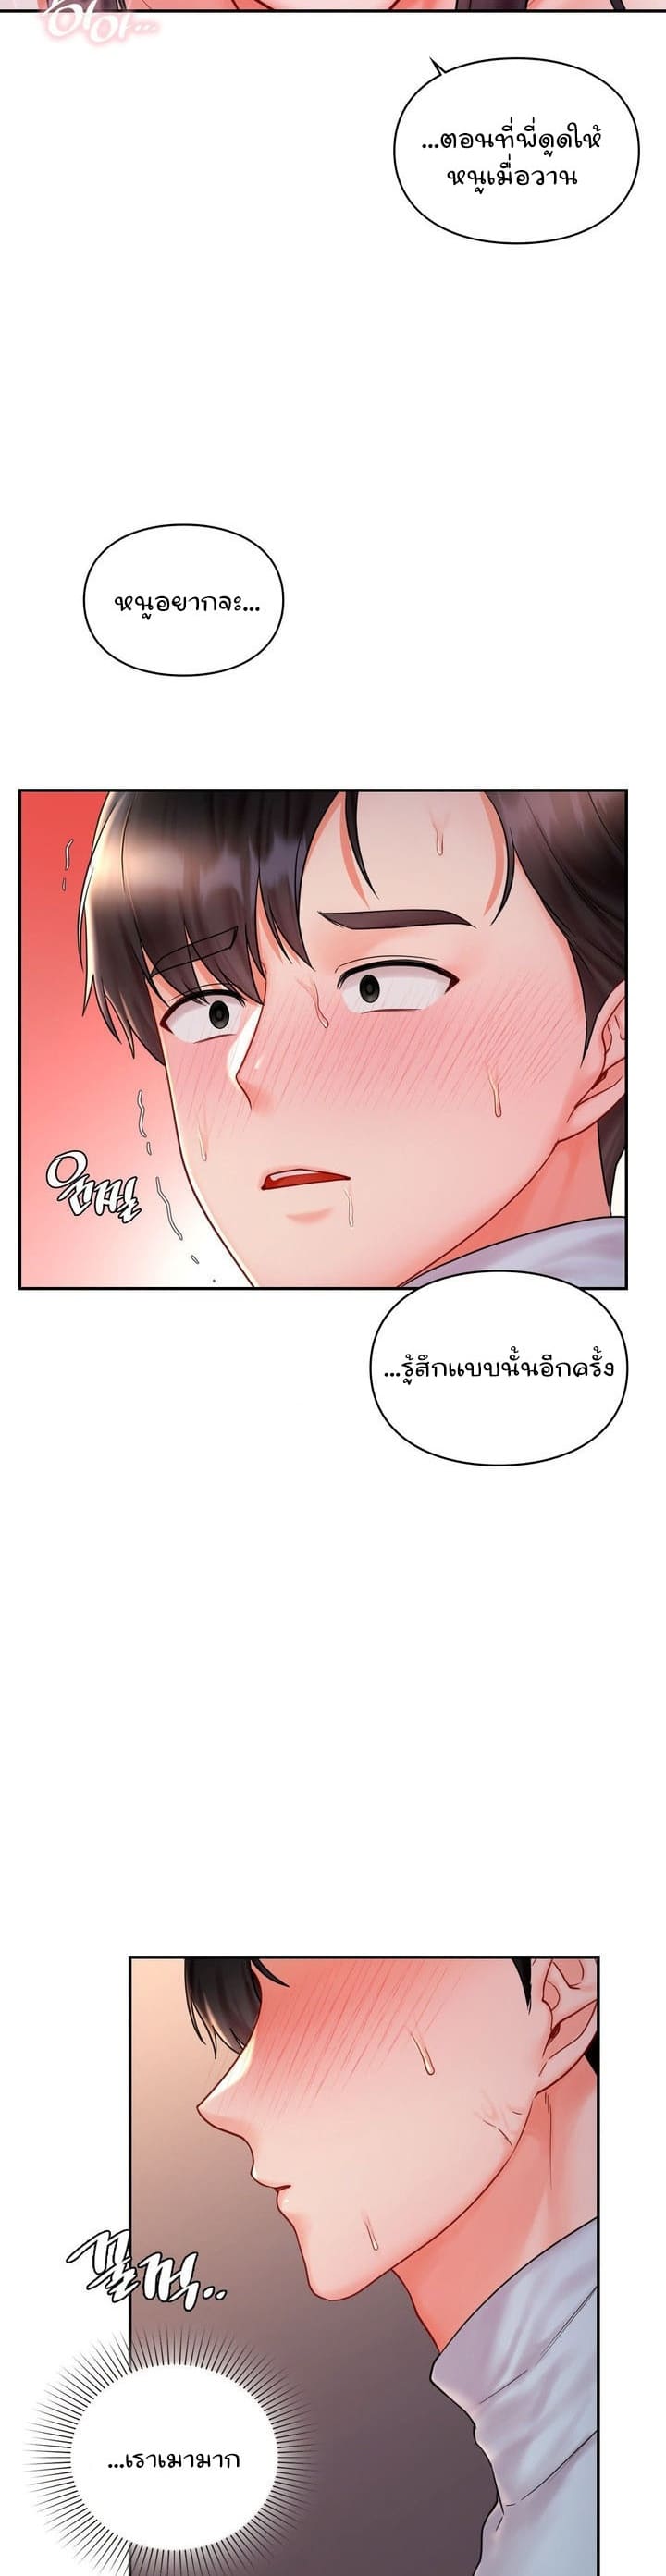 The Kid Is Obsessed With Me ตอนที่ 9 ภาพ 11